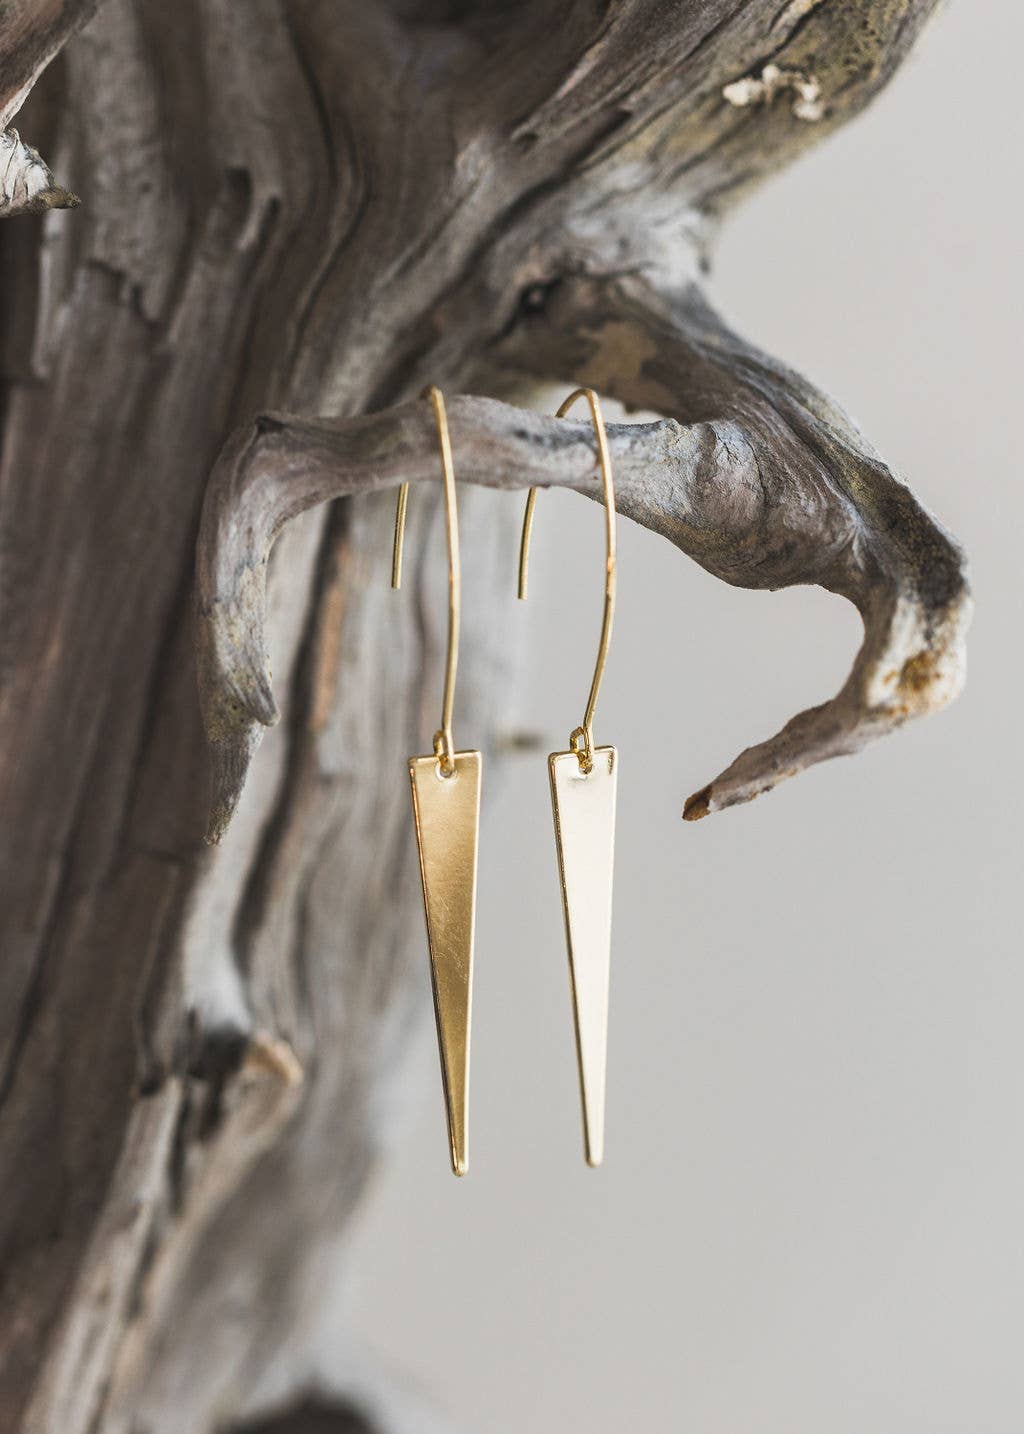 We love these edgy fun earrings, they are so lightweight and go with everything, 18K gold plated, they will be a favorite for you without a doubt!